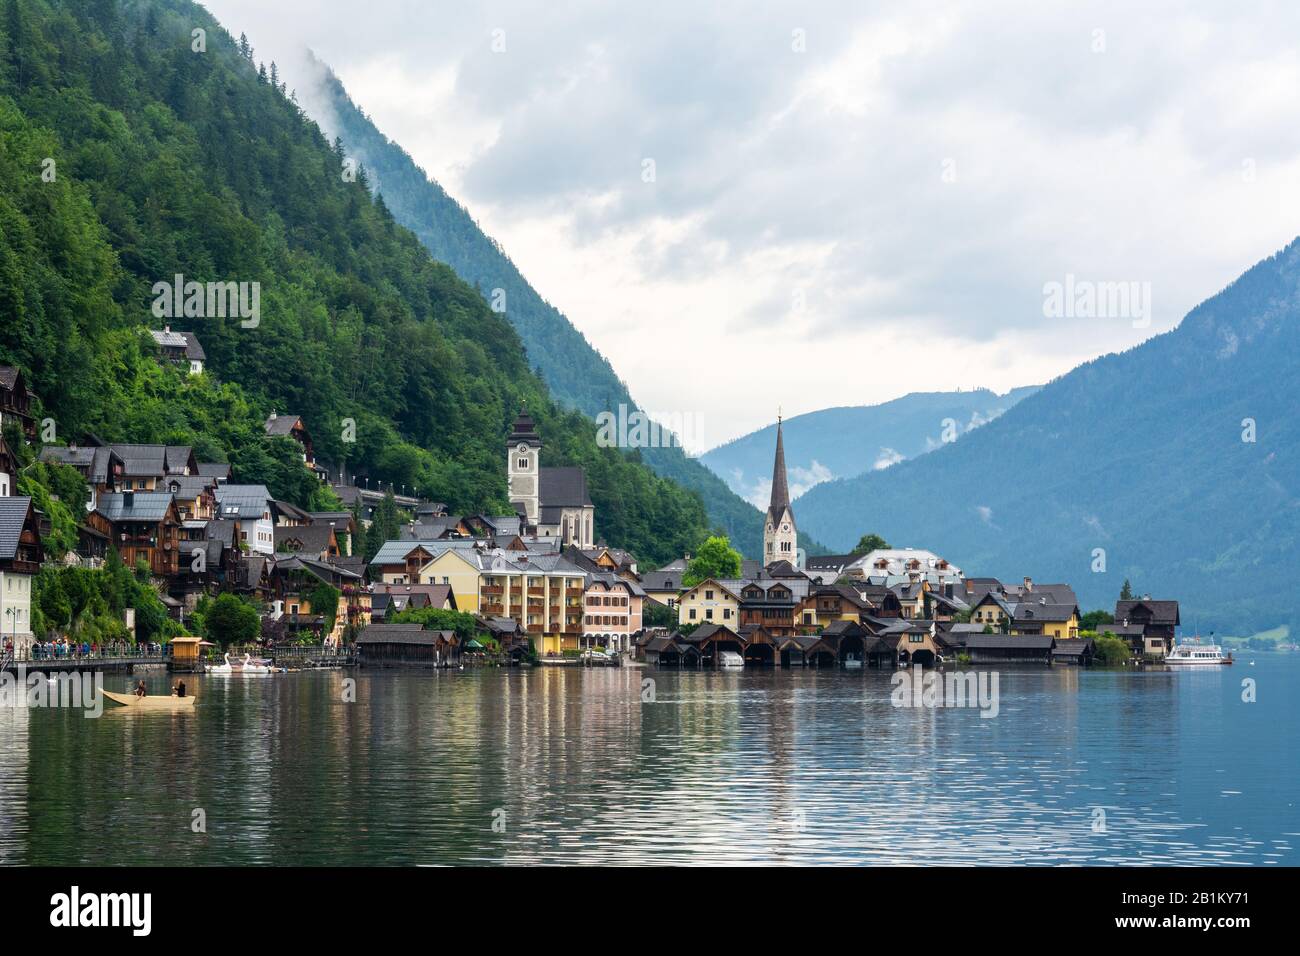 Hallstatt, Austria – July 9, 2016. View of Hallstatt town on the shore of Hallstatter See lake in Austria, with residential buildings and commercial p Stock Photo